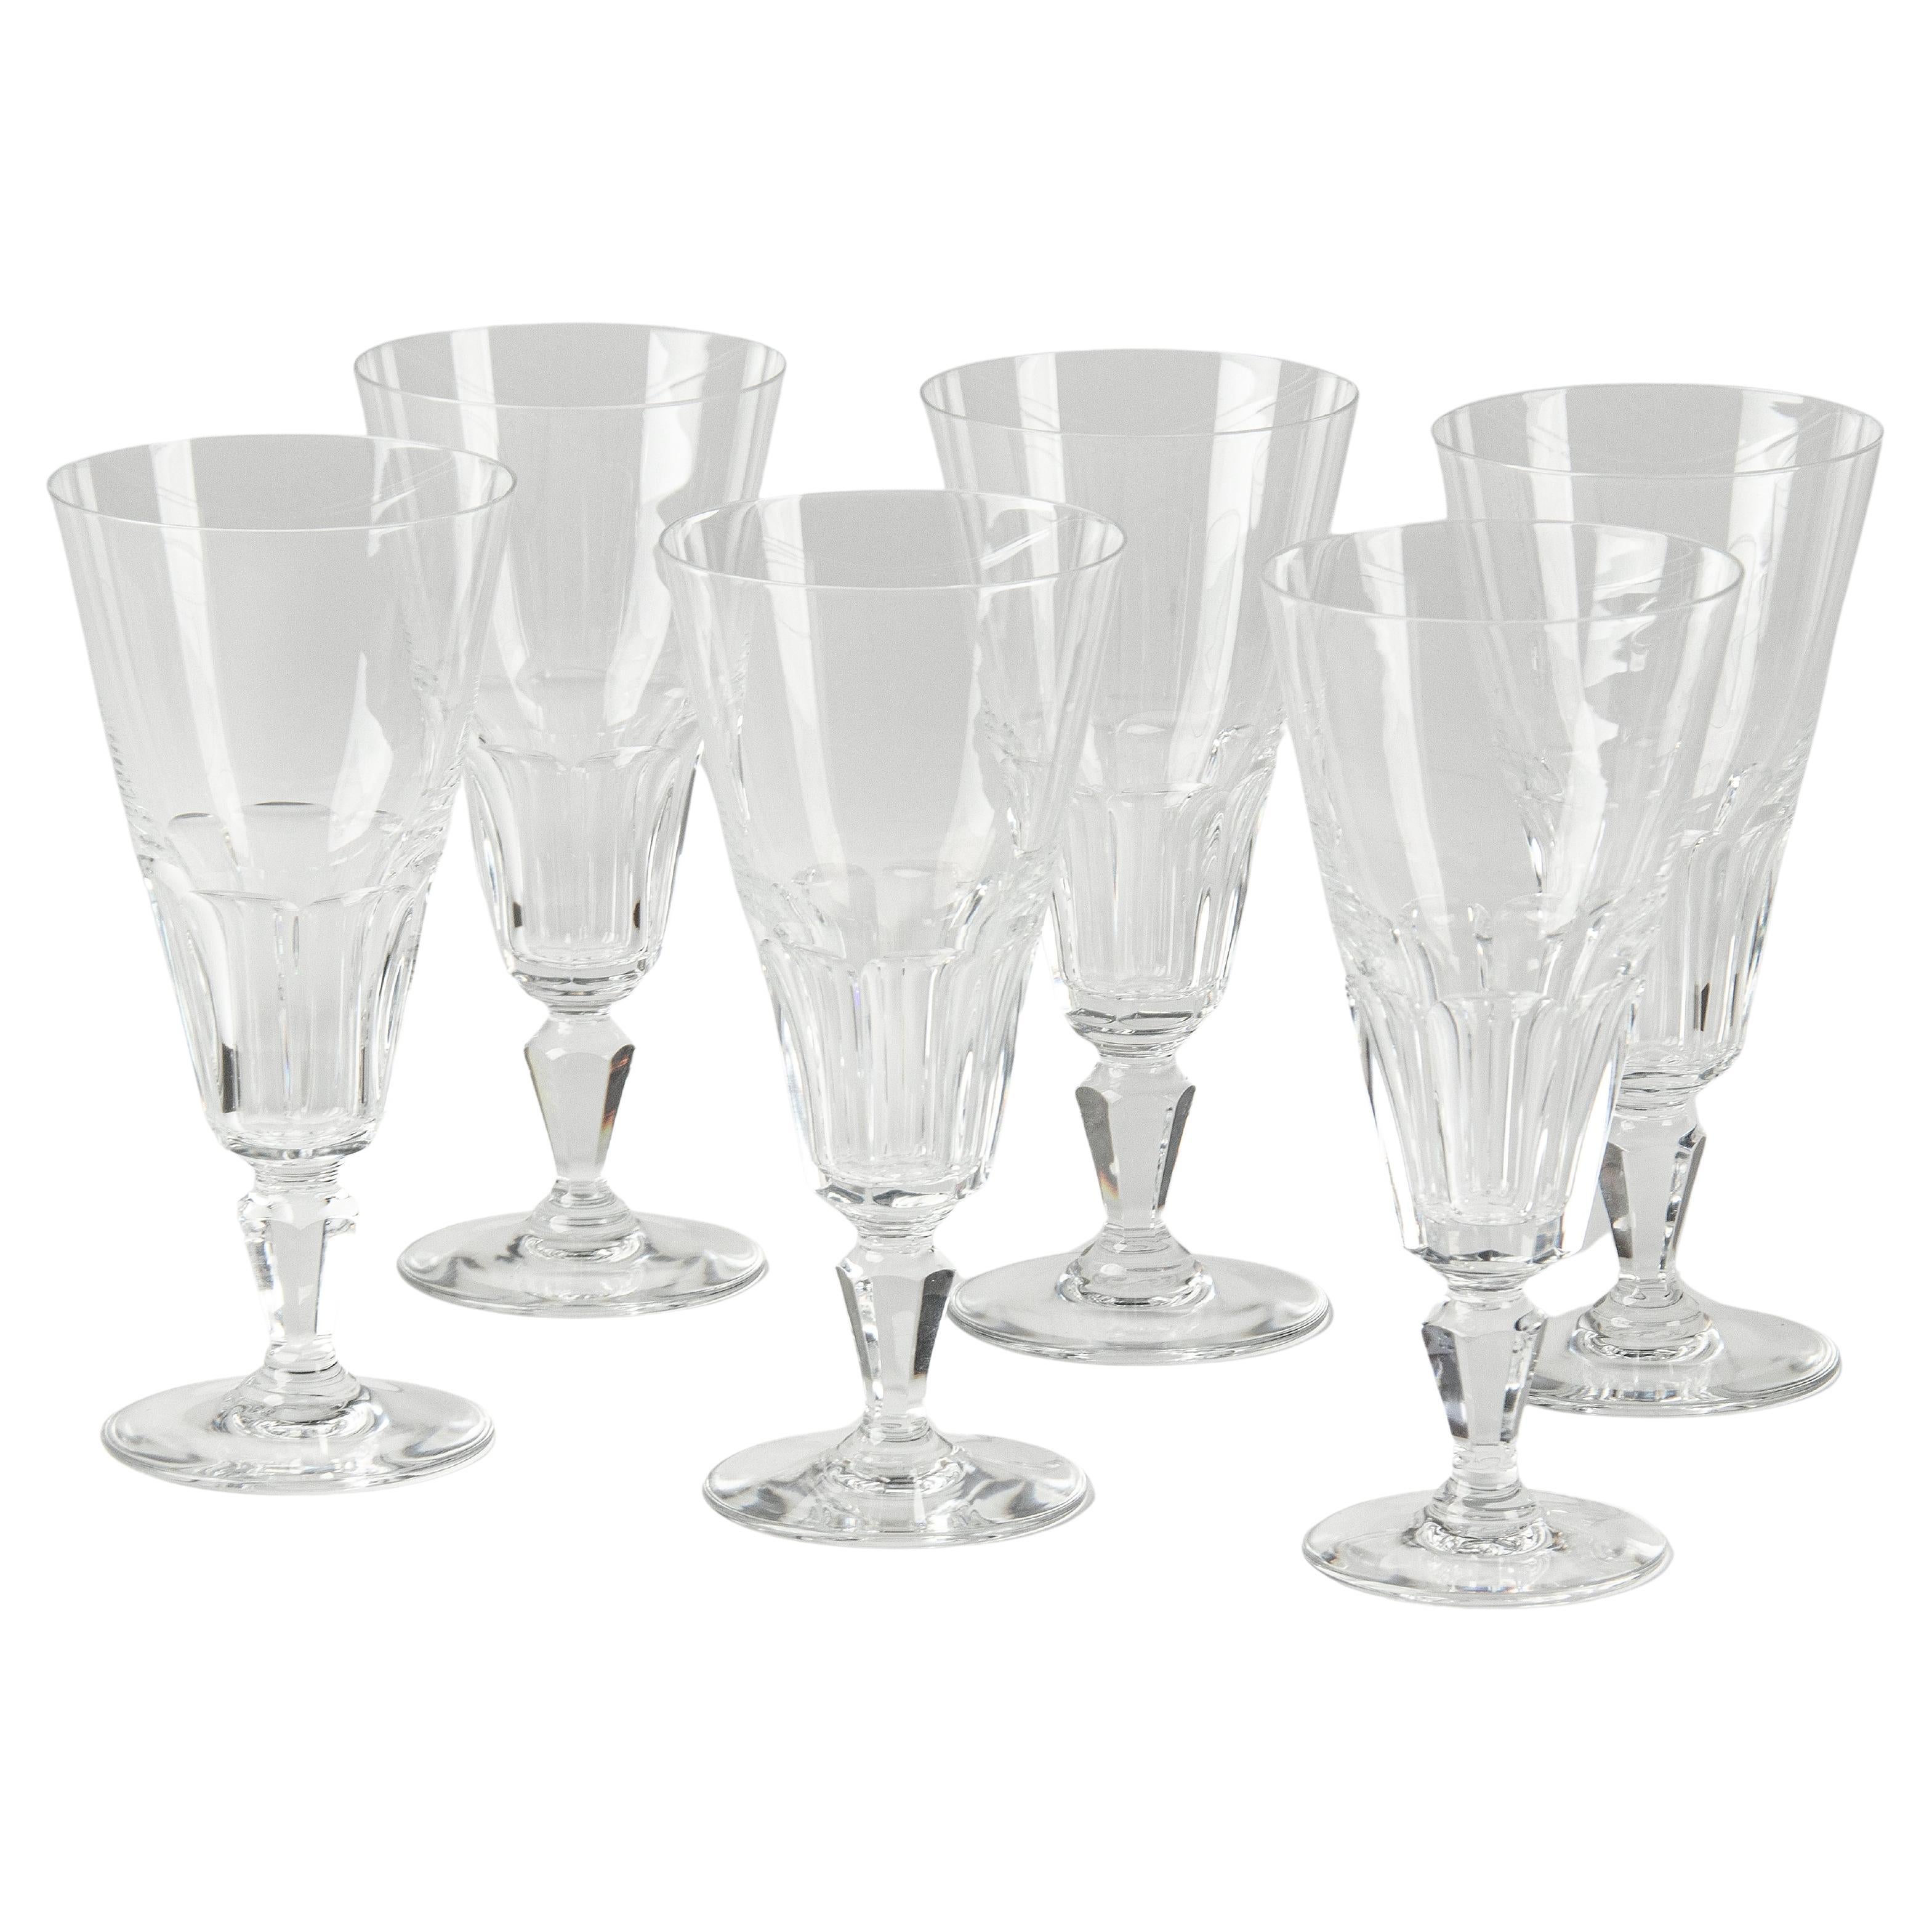 Set of 6 Crystal Champagne Flutes Made by Baccarat